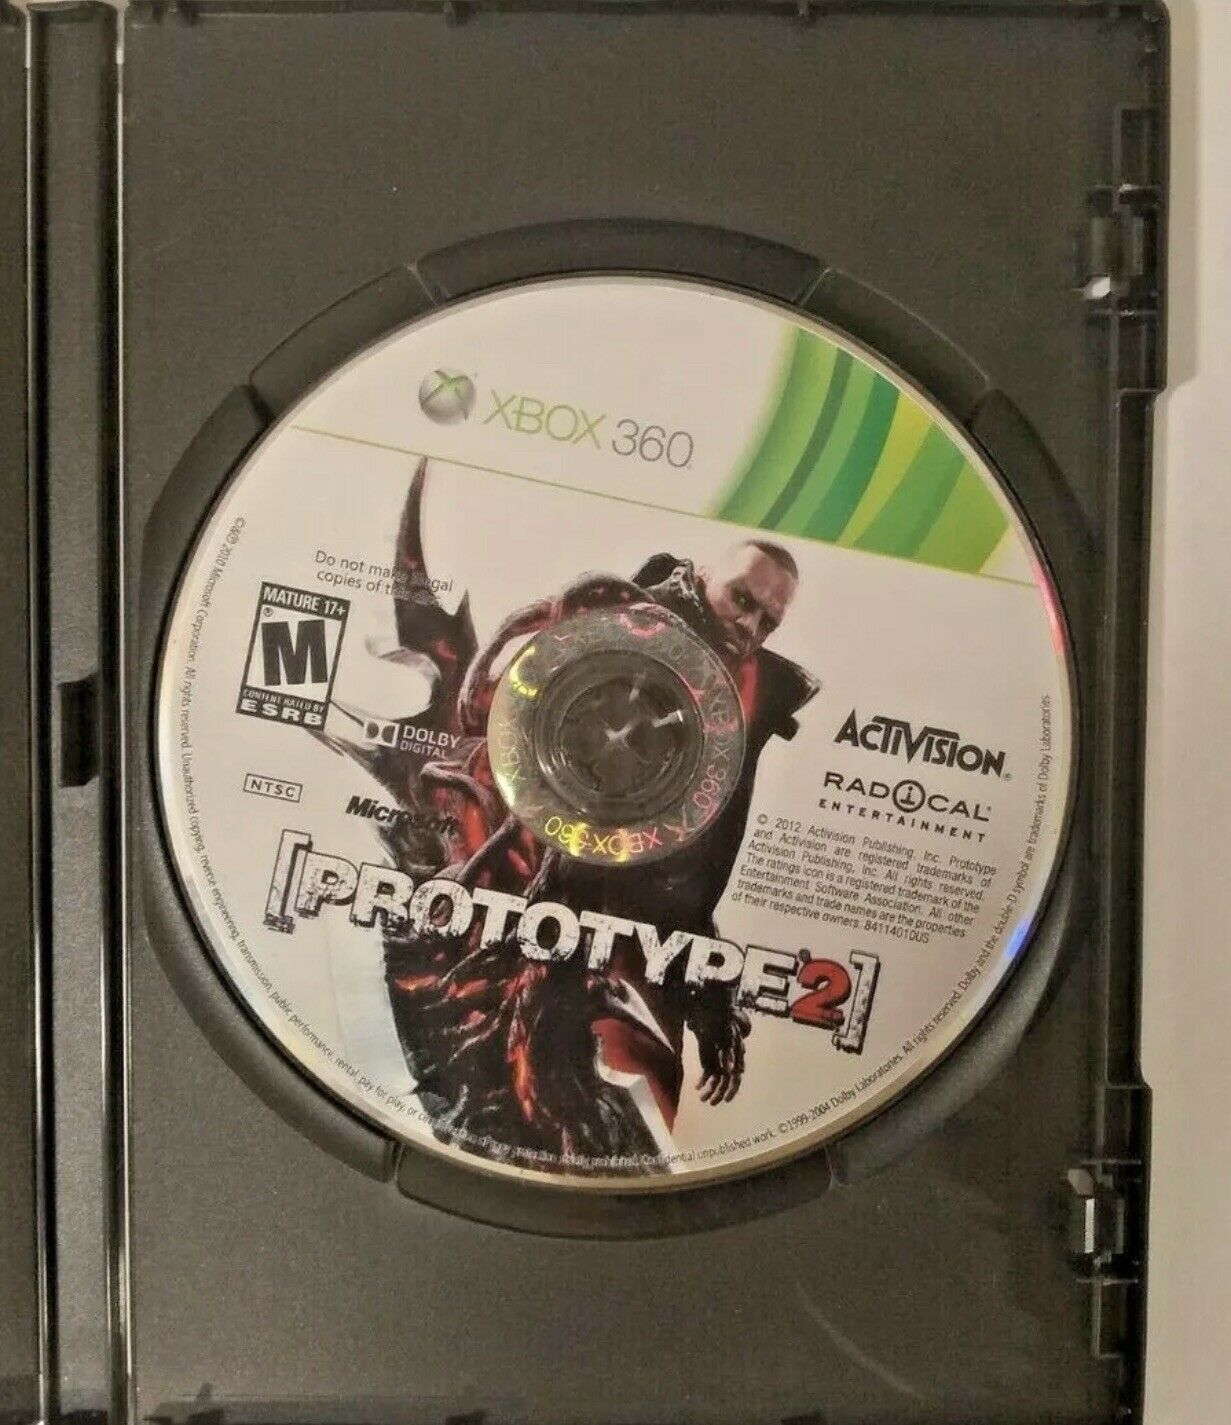 Primary image for Prototype 2 (Xbox 360) Disc Only